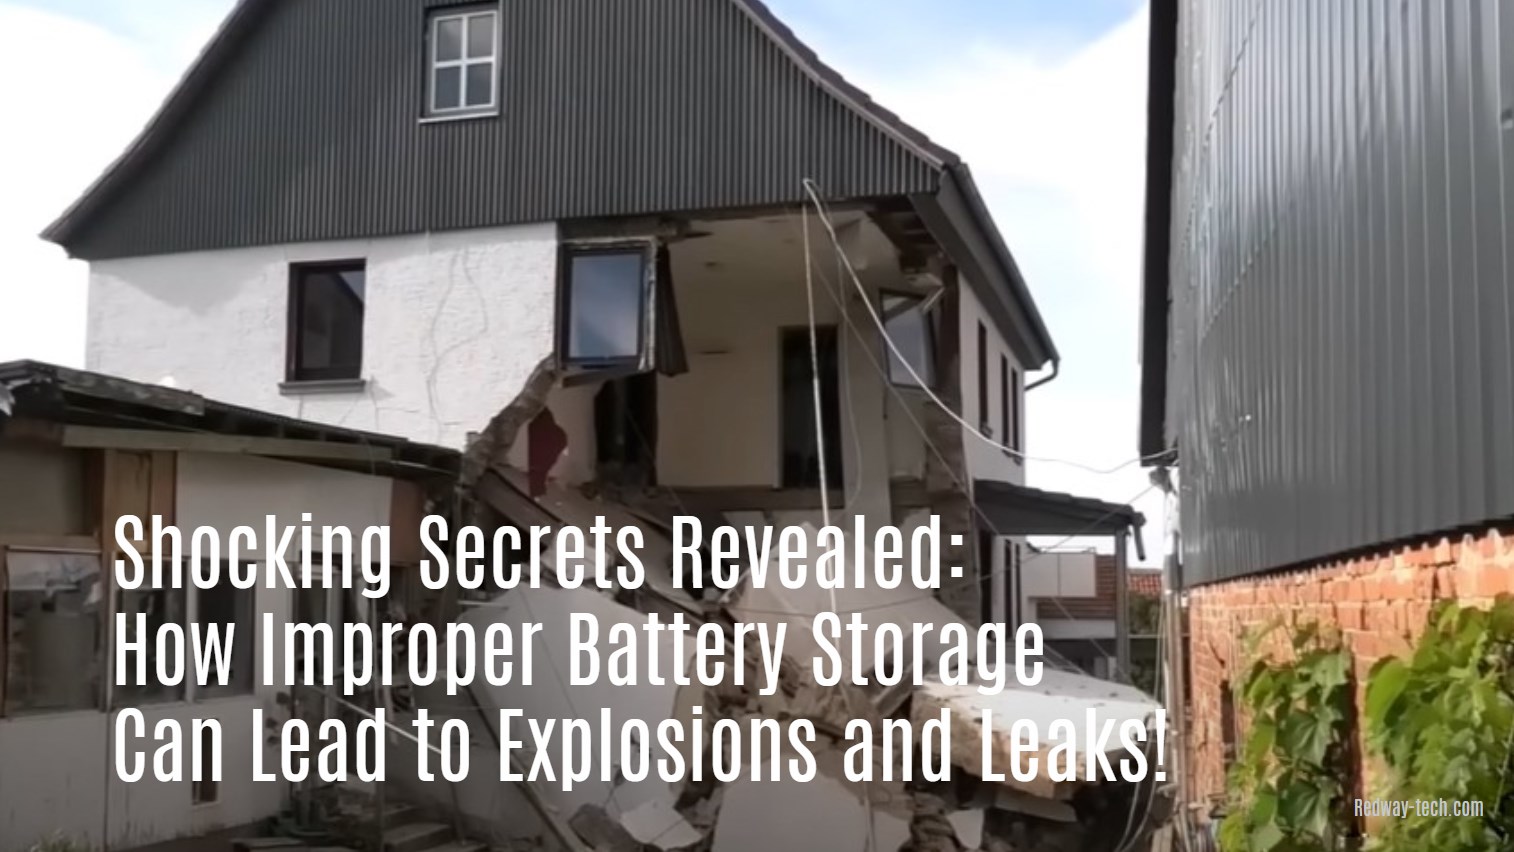 Shocking Secrets Revealed: How Improper Battery Storage Can Lead to Explosions and Leaks!